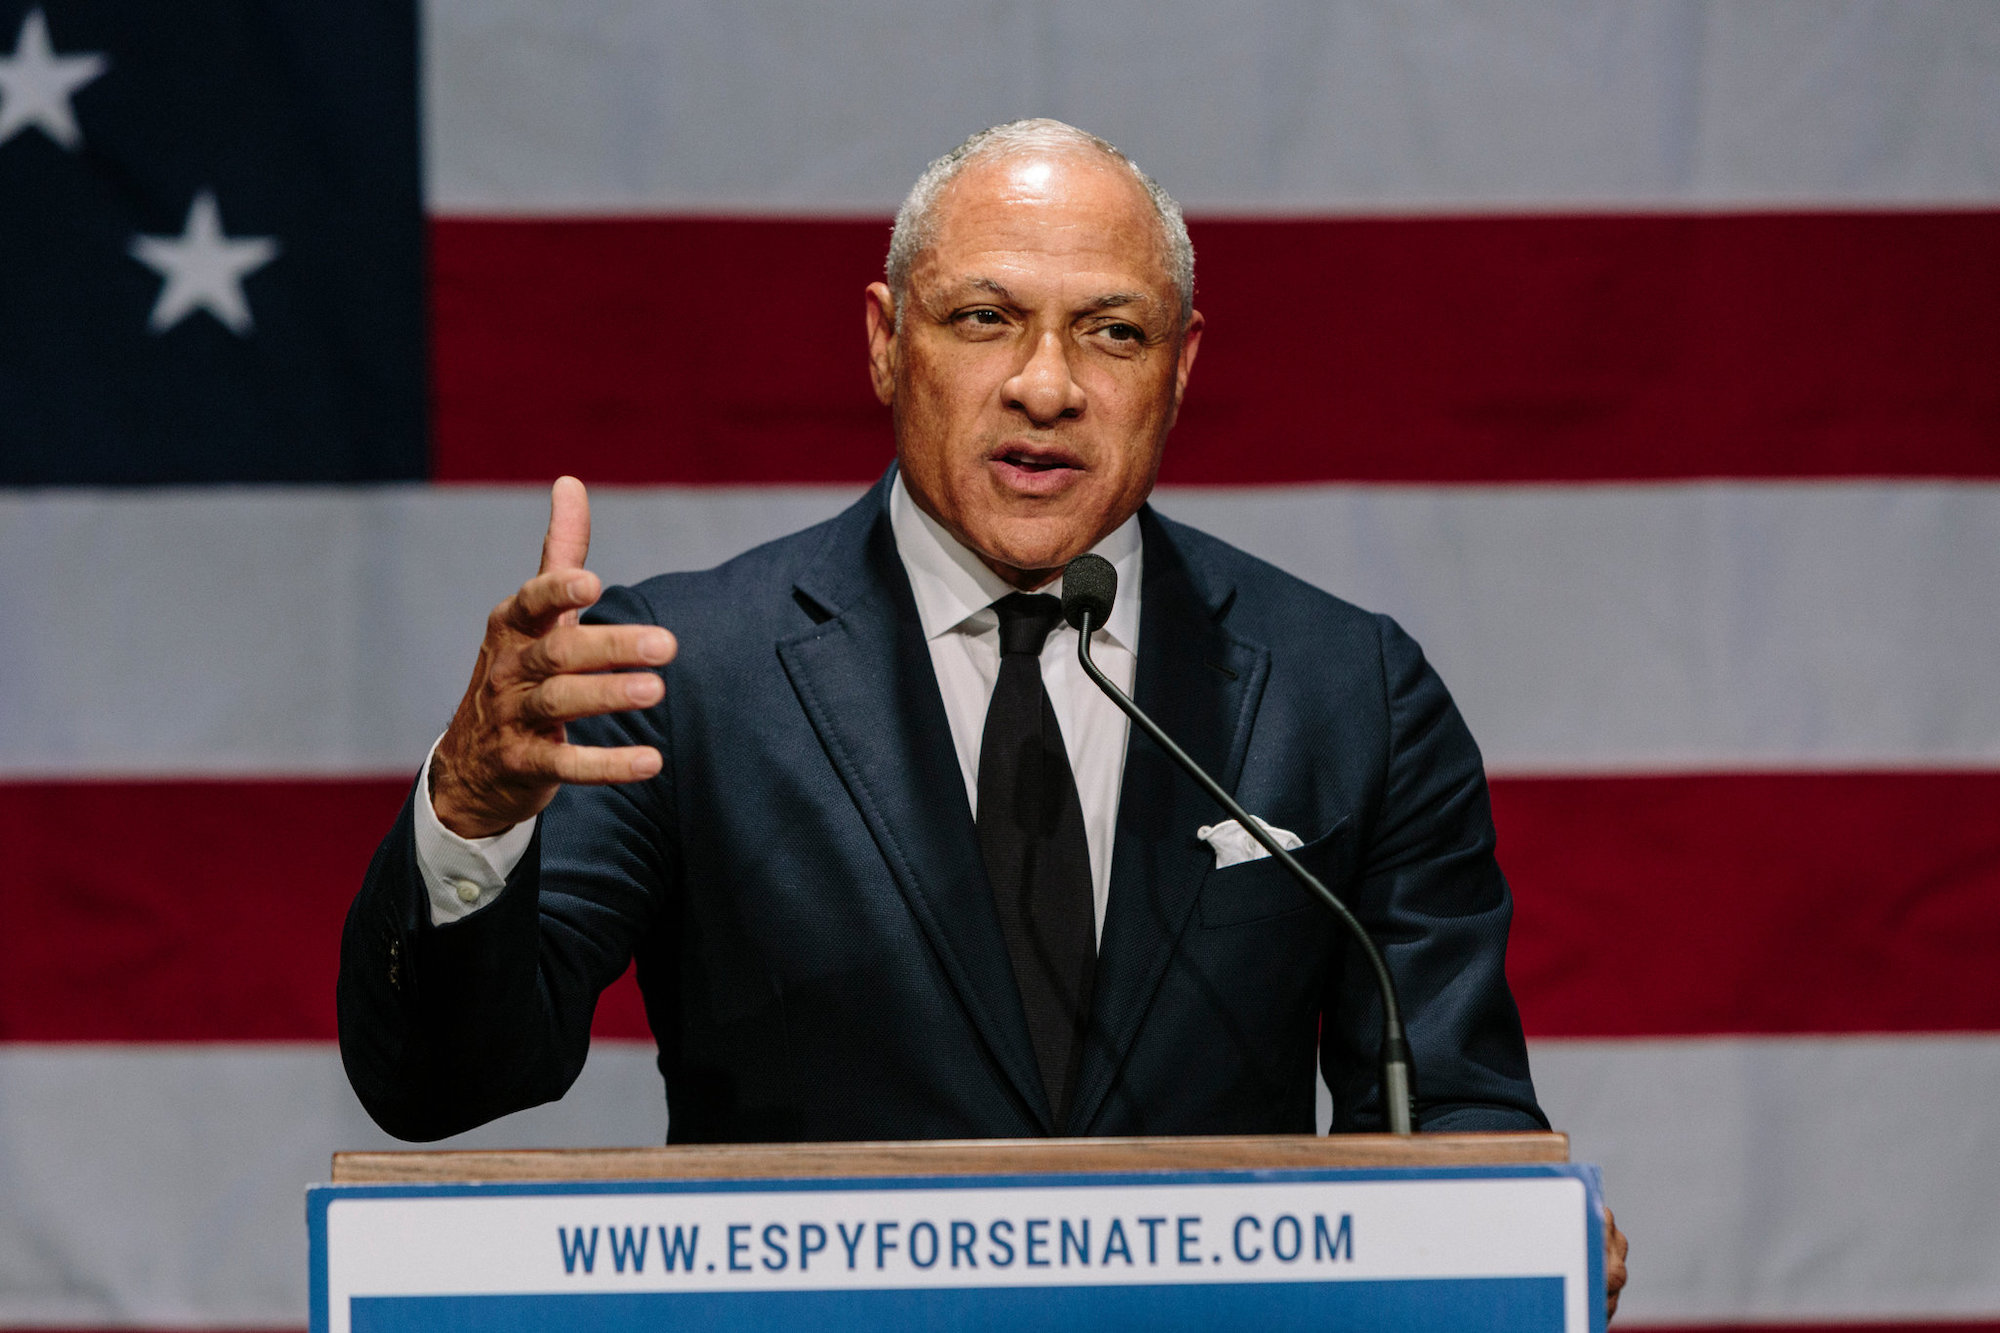 Mike Espy Would Be Mississippi’s First Black Senator in 139 Years, But Governor Bryant Says It’d Begin ‘1000 Years of Darkness’ | Deep South Voice